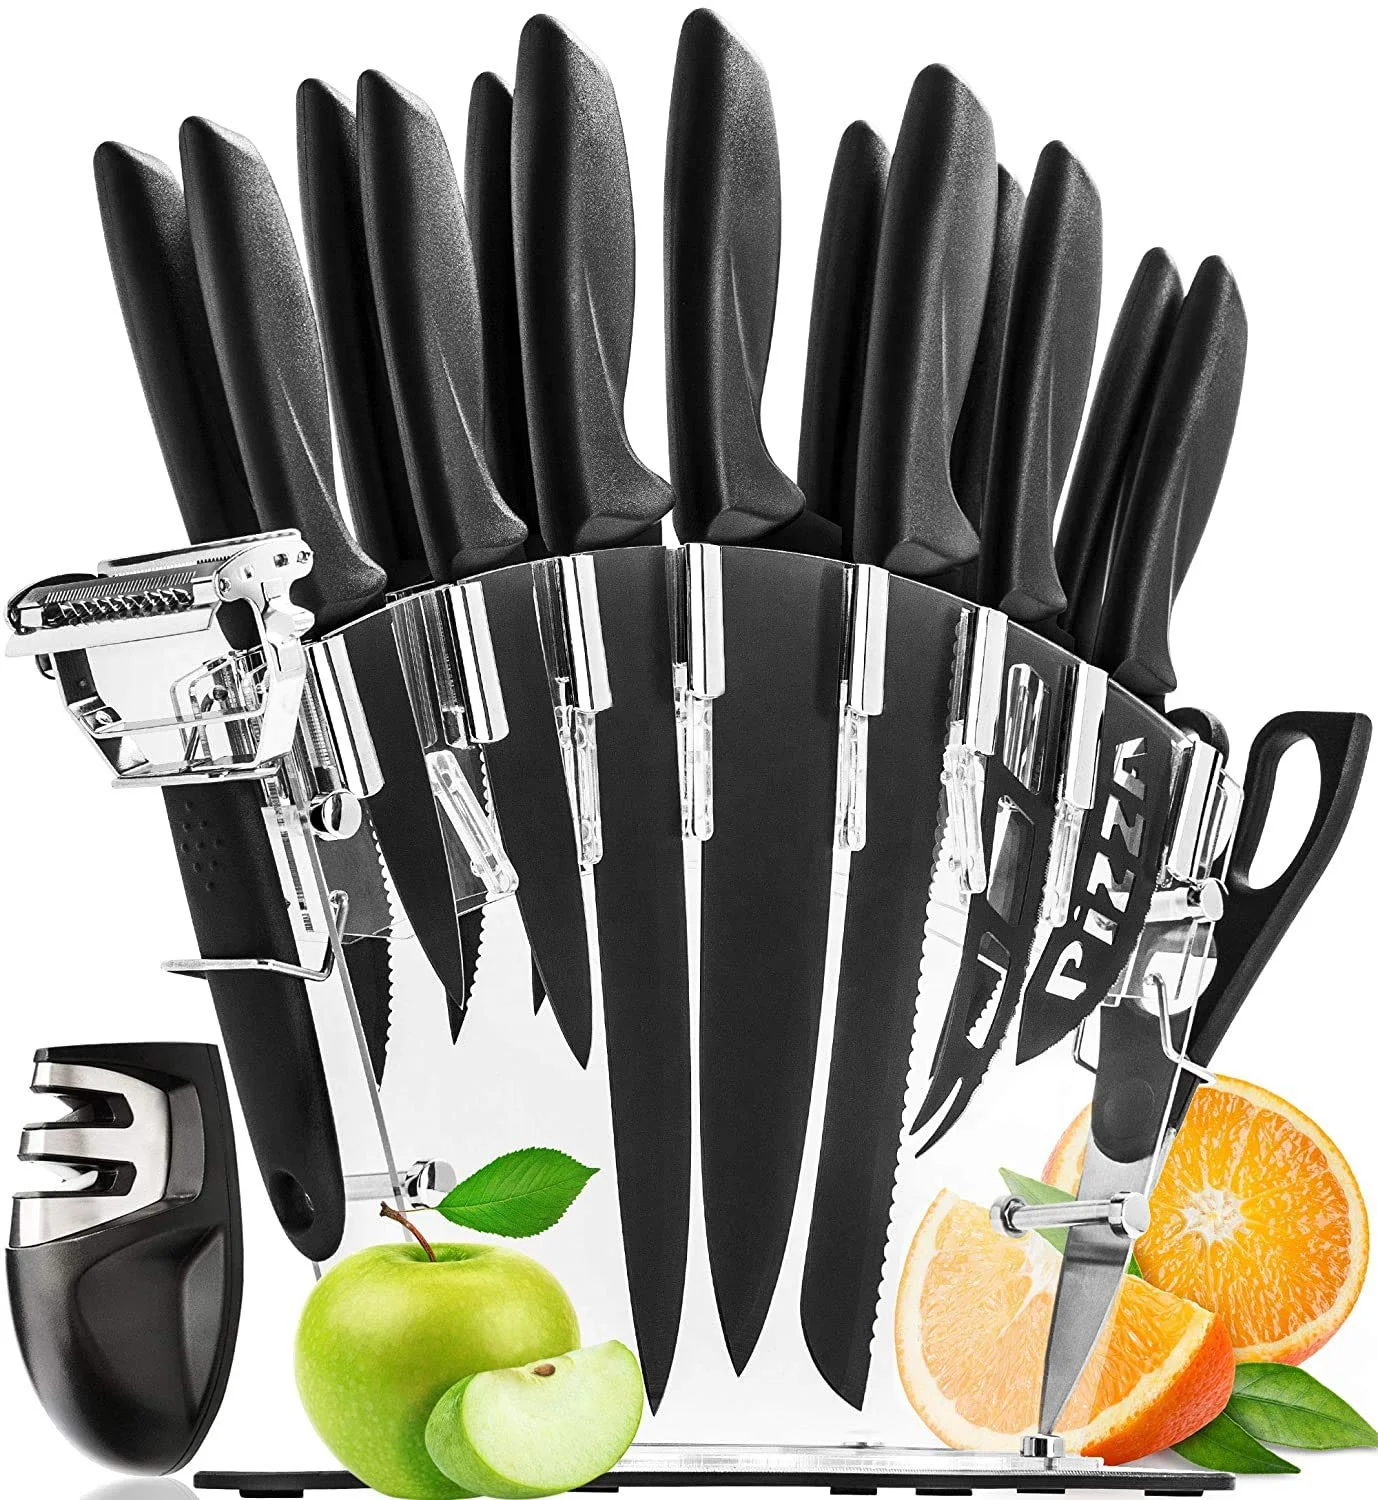 

Justa 17 Piece Stainless Steel Kitchen Chef Knife Set with Block and Knife Sharpener, Black